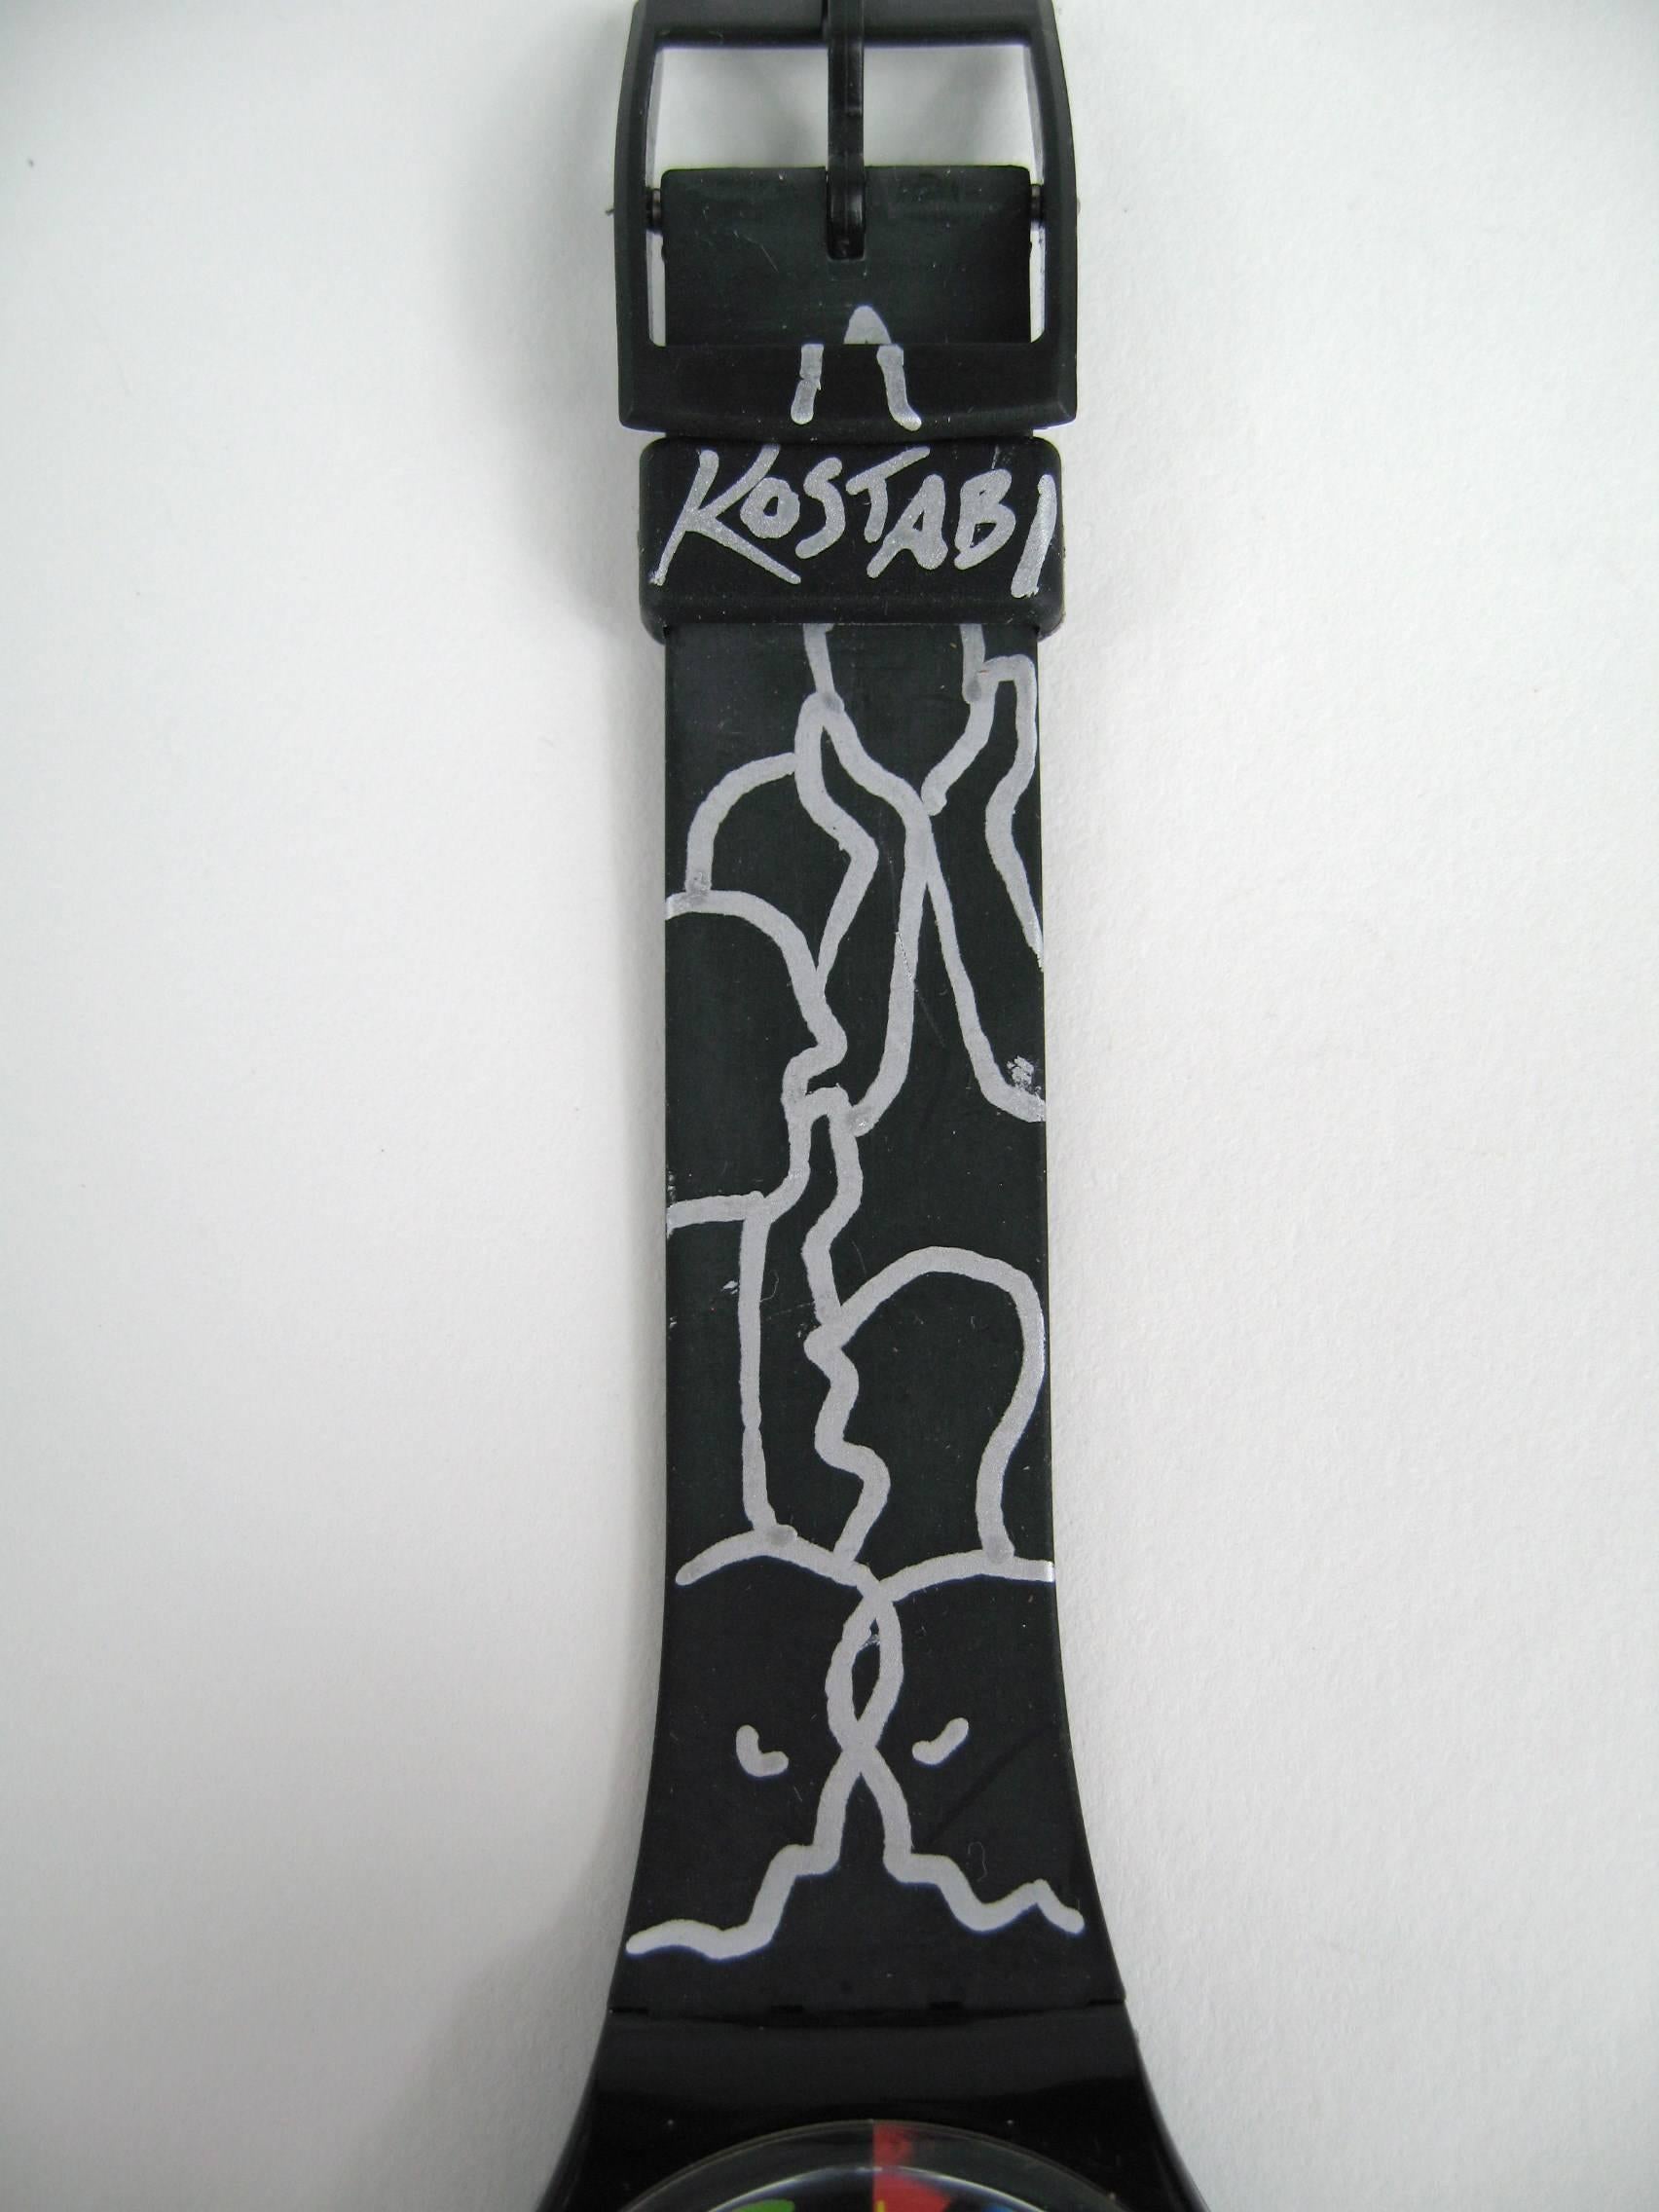 New old stock 1995 Mark Kostabi Swatch Watch, Twelve Apostles Hand illustrated and Signed on the case and band by Kostabi Himself. He named it BOMB PARTY 1/1, Tea for 2. This is a 1 of a kind Kostabi Hand illustrated Swatch Watch...I had him Hand